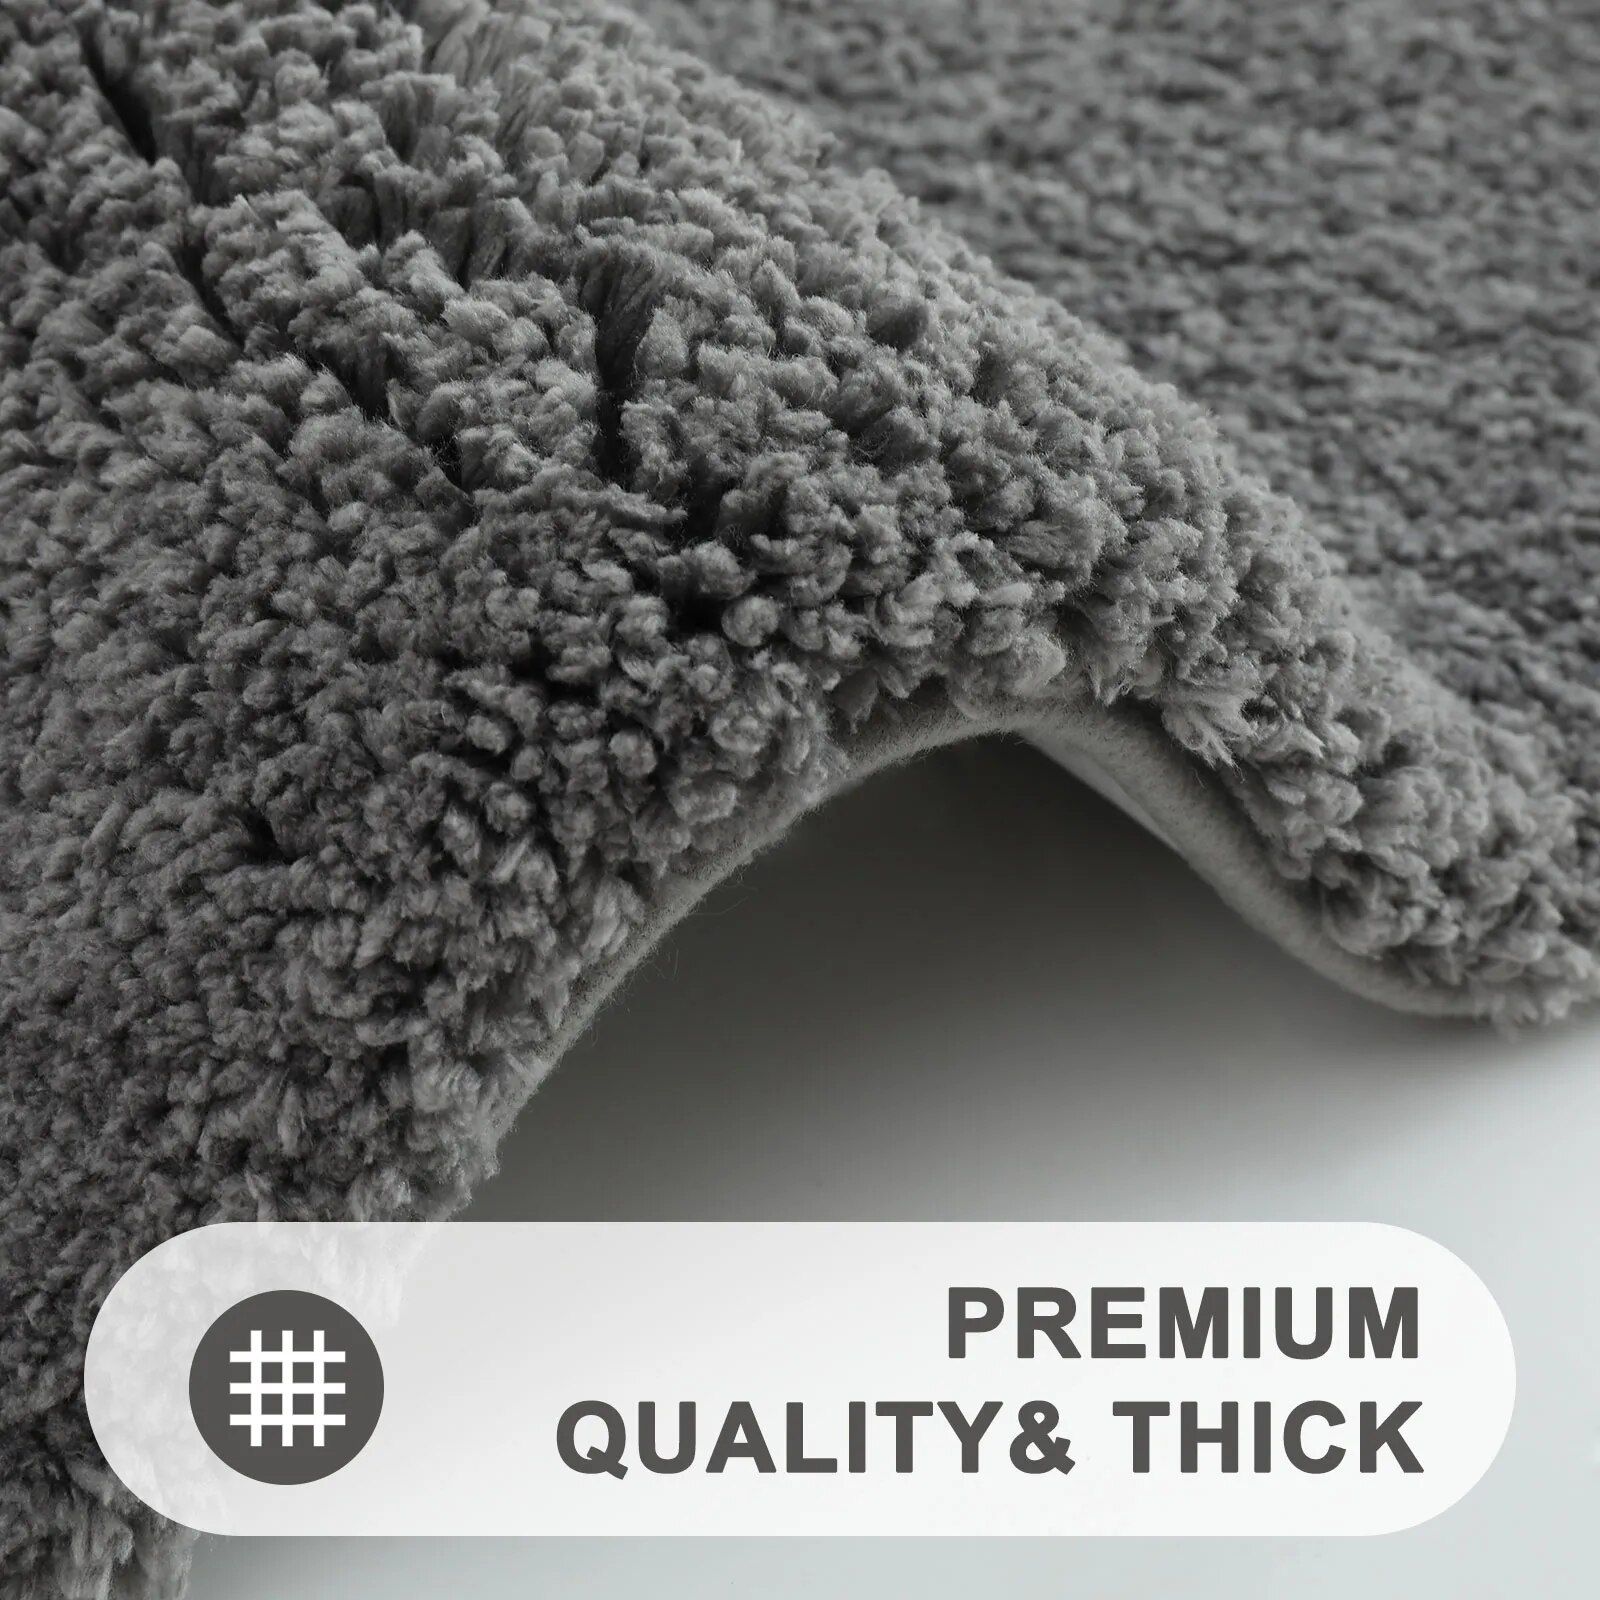 Luxurious Quick-Dry Absorbent Plush Bath Rug - Anti-Slip, Soft, and Durable for Home Decor 